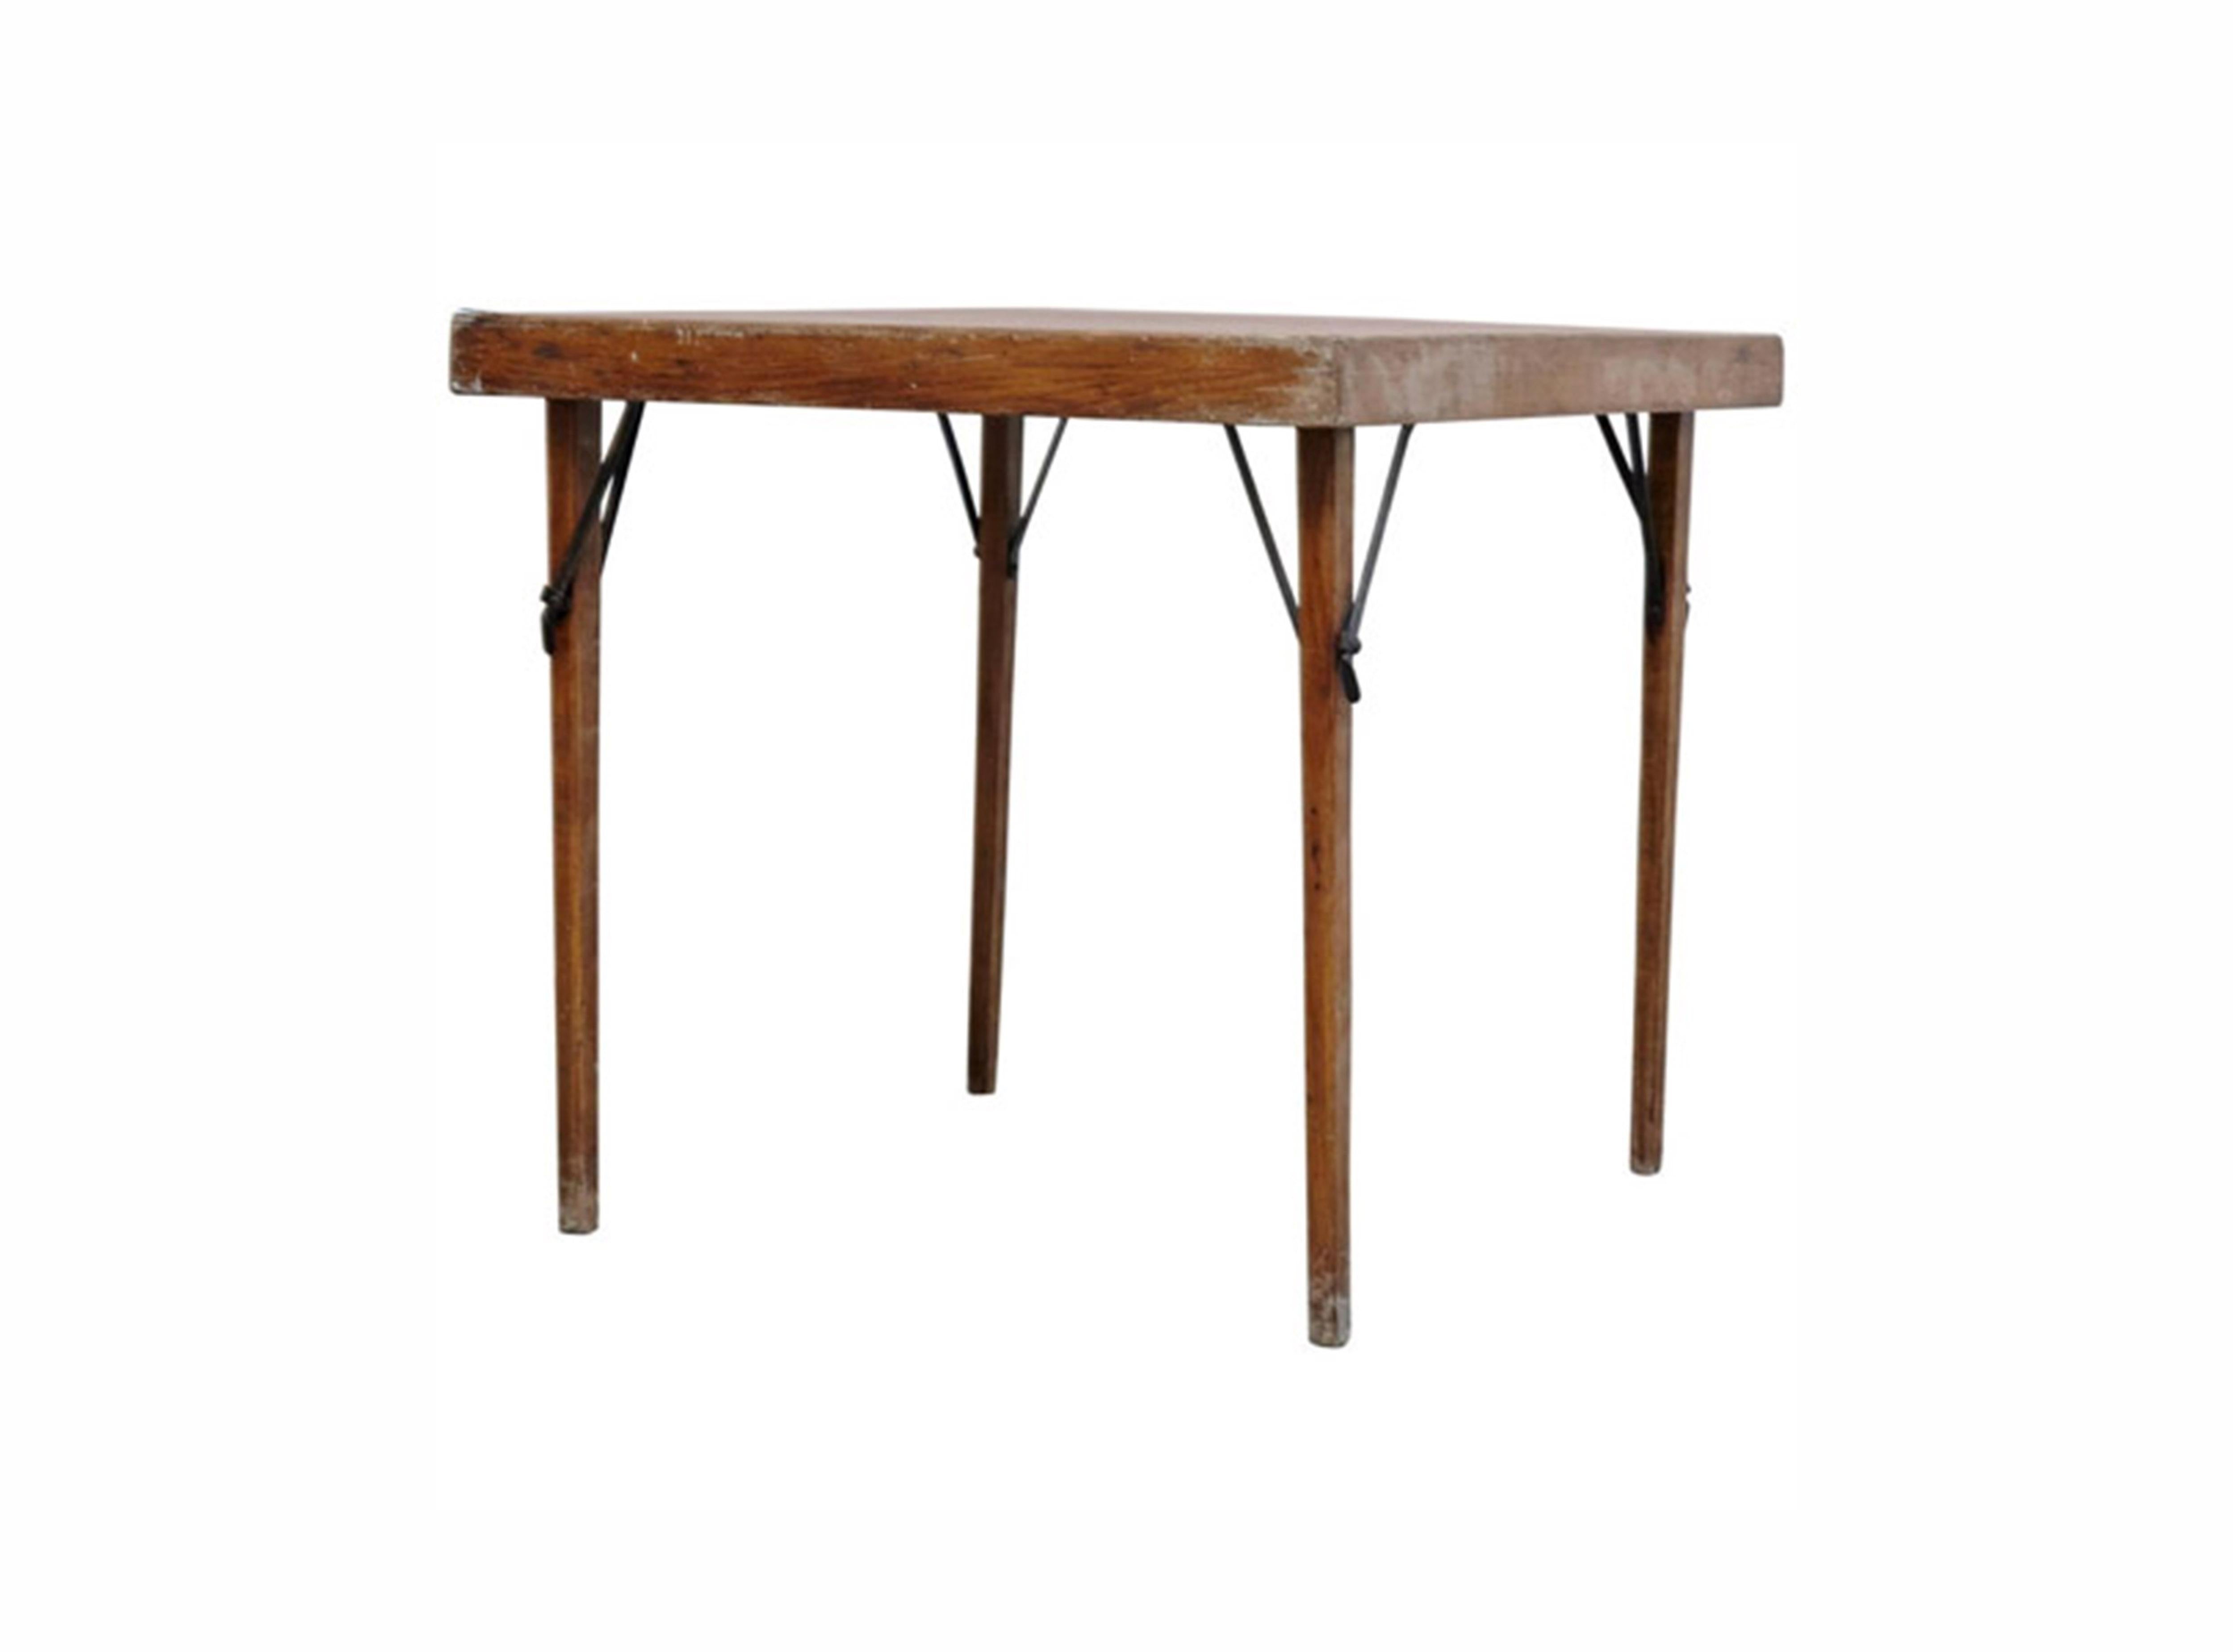 Rare Folding table T211 designed by Thonet manufactured In Germany, circa 1930.

In good original condition, with minor wear consistent with age and use, preserving a beautiful patina.

In the 1830s, Thonet began trying to make furniture out of